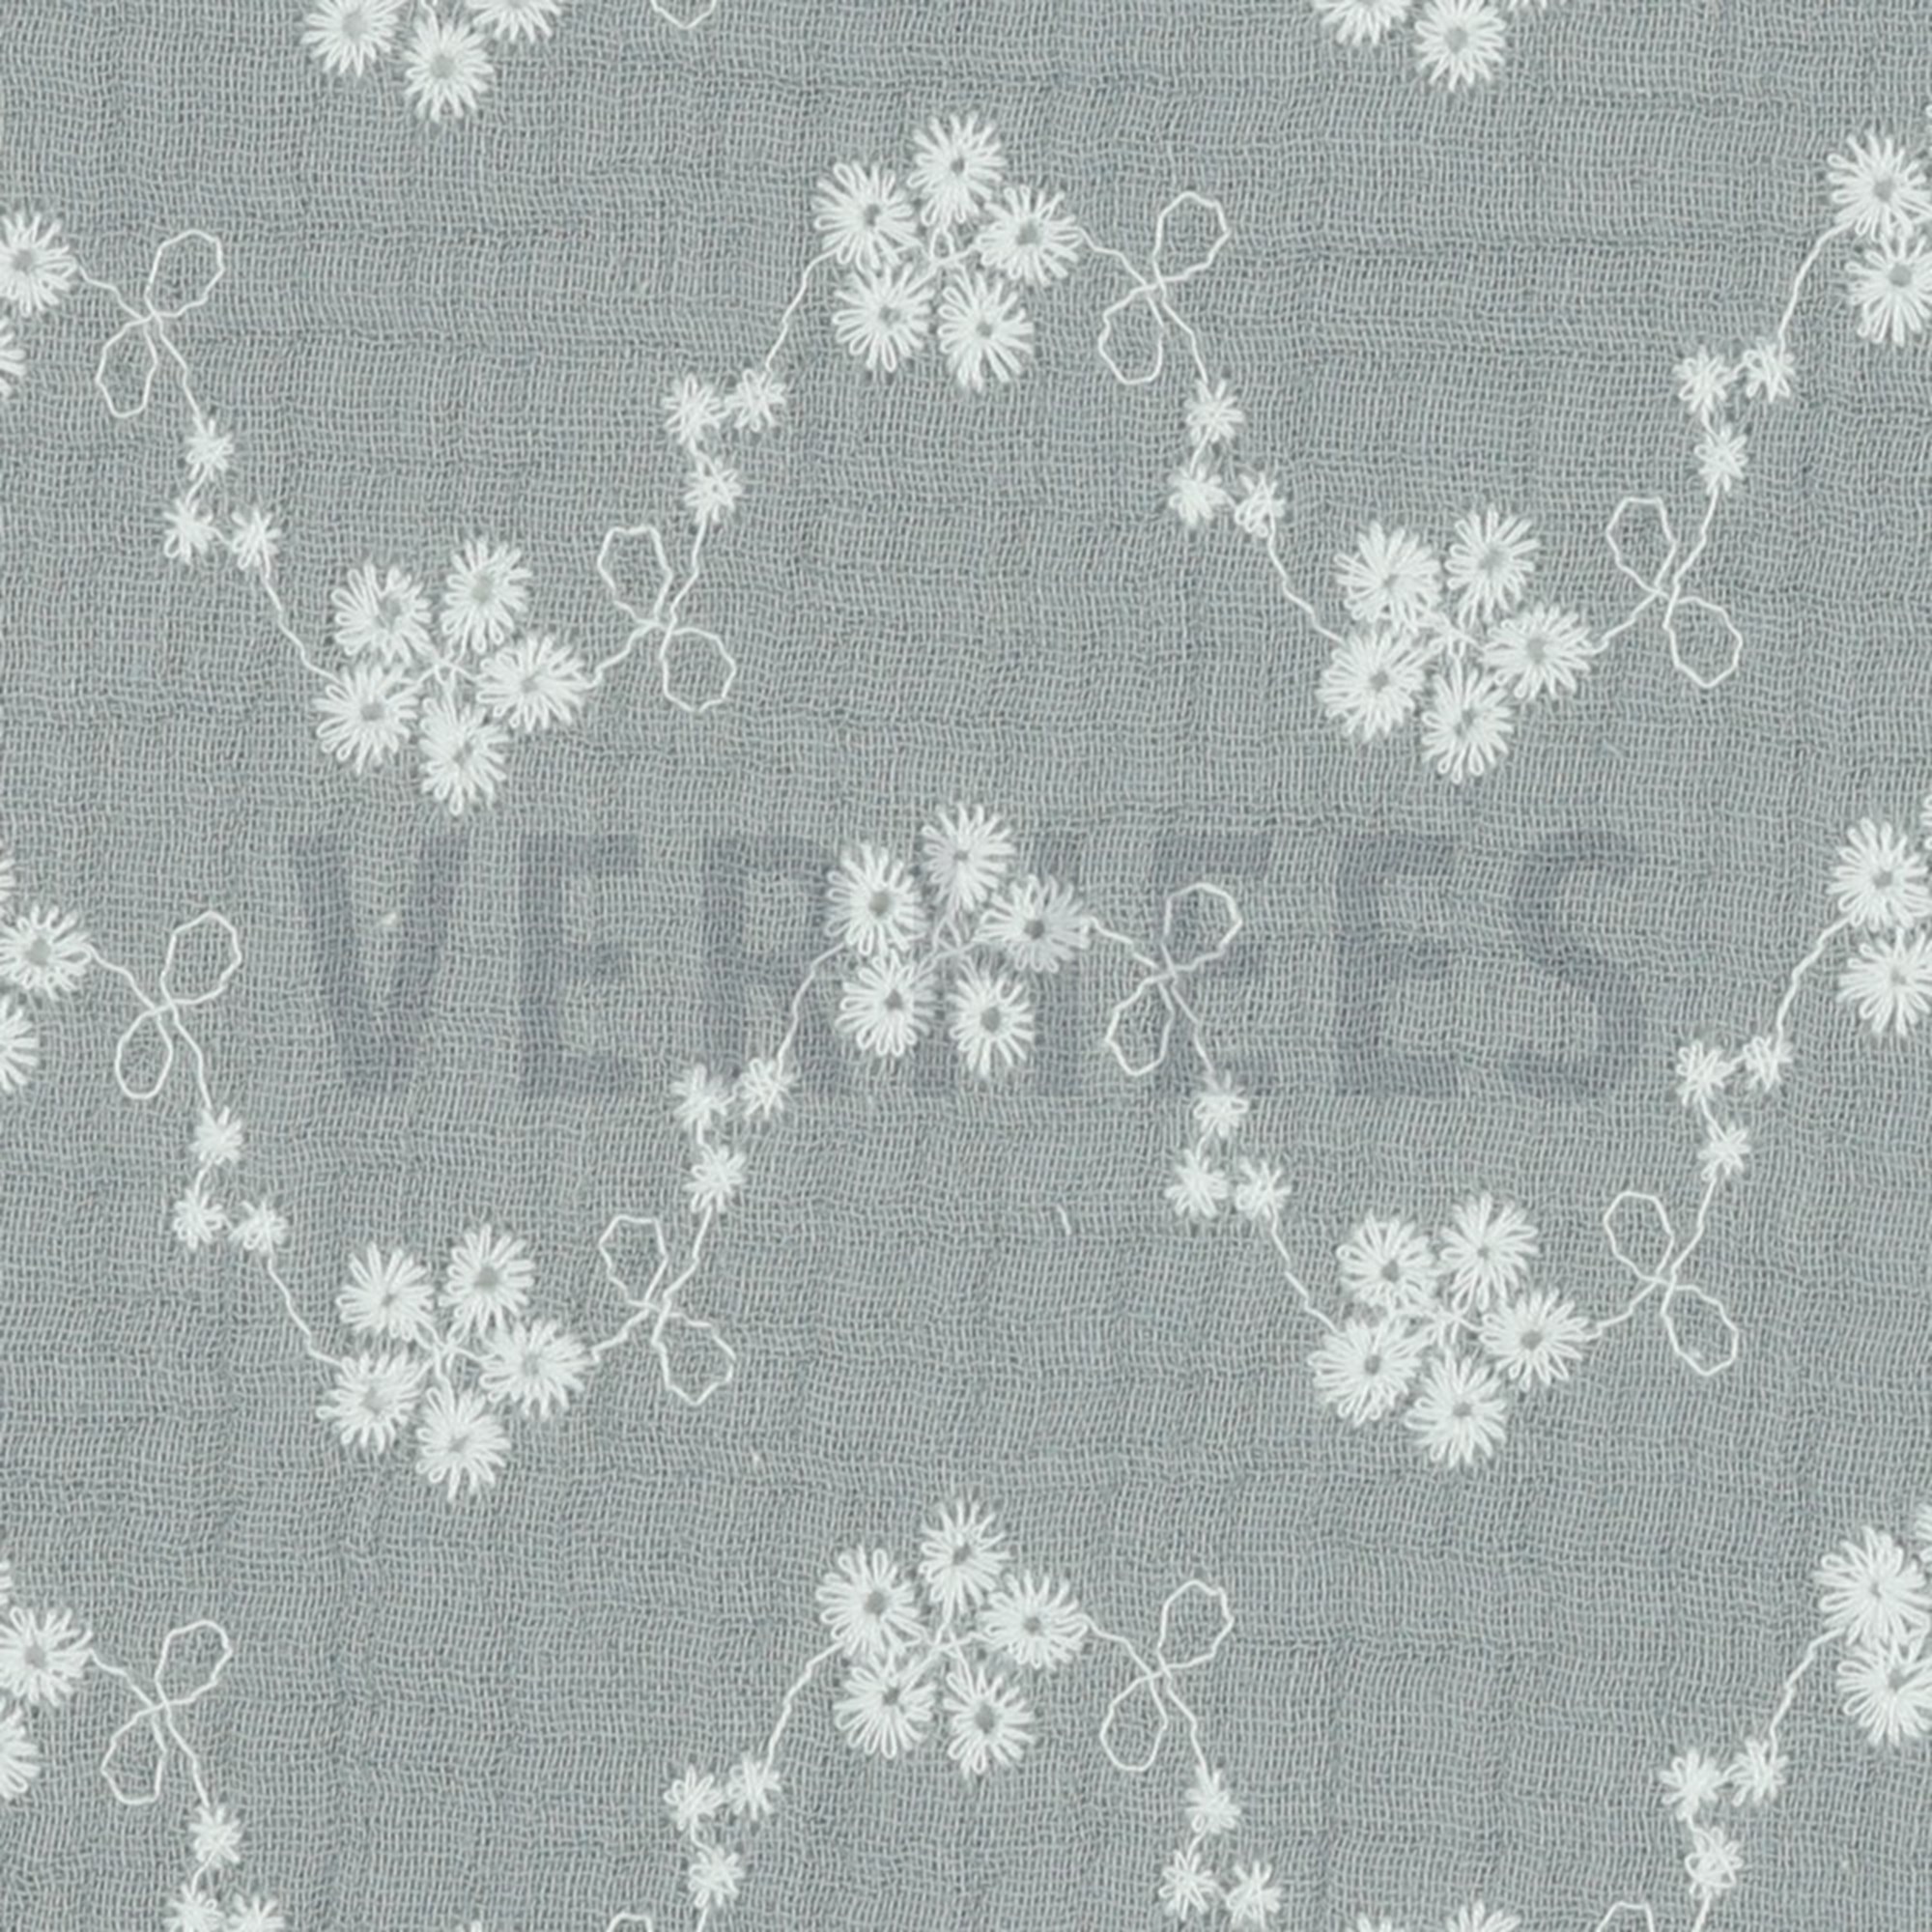 DOUBLE GAUZE WHITE EMBROIDERY GREY (high resolution) #3